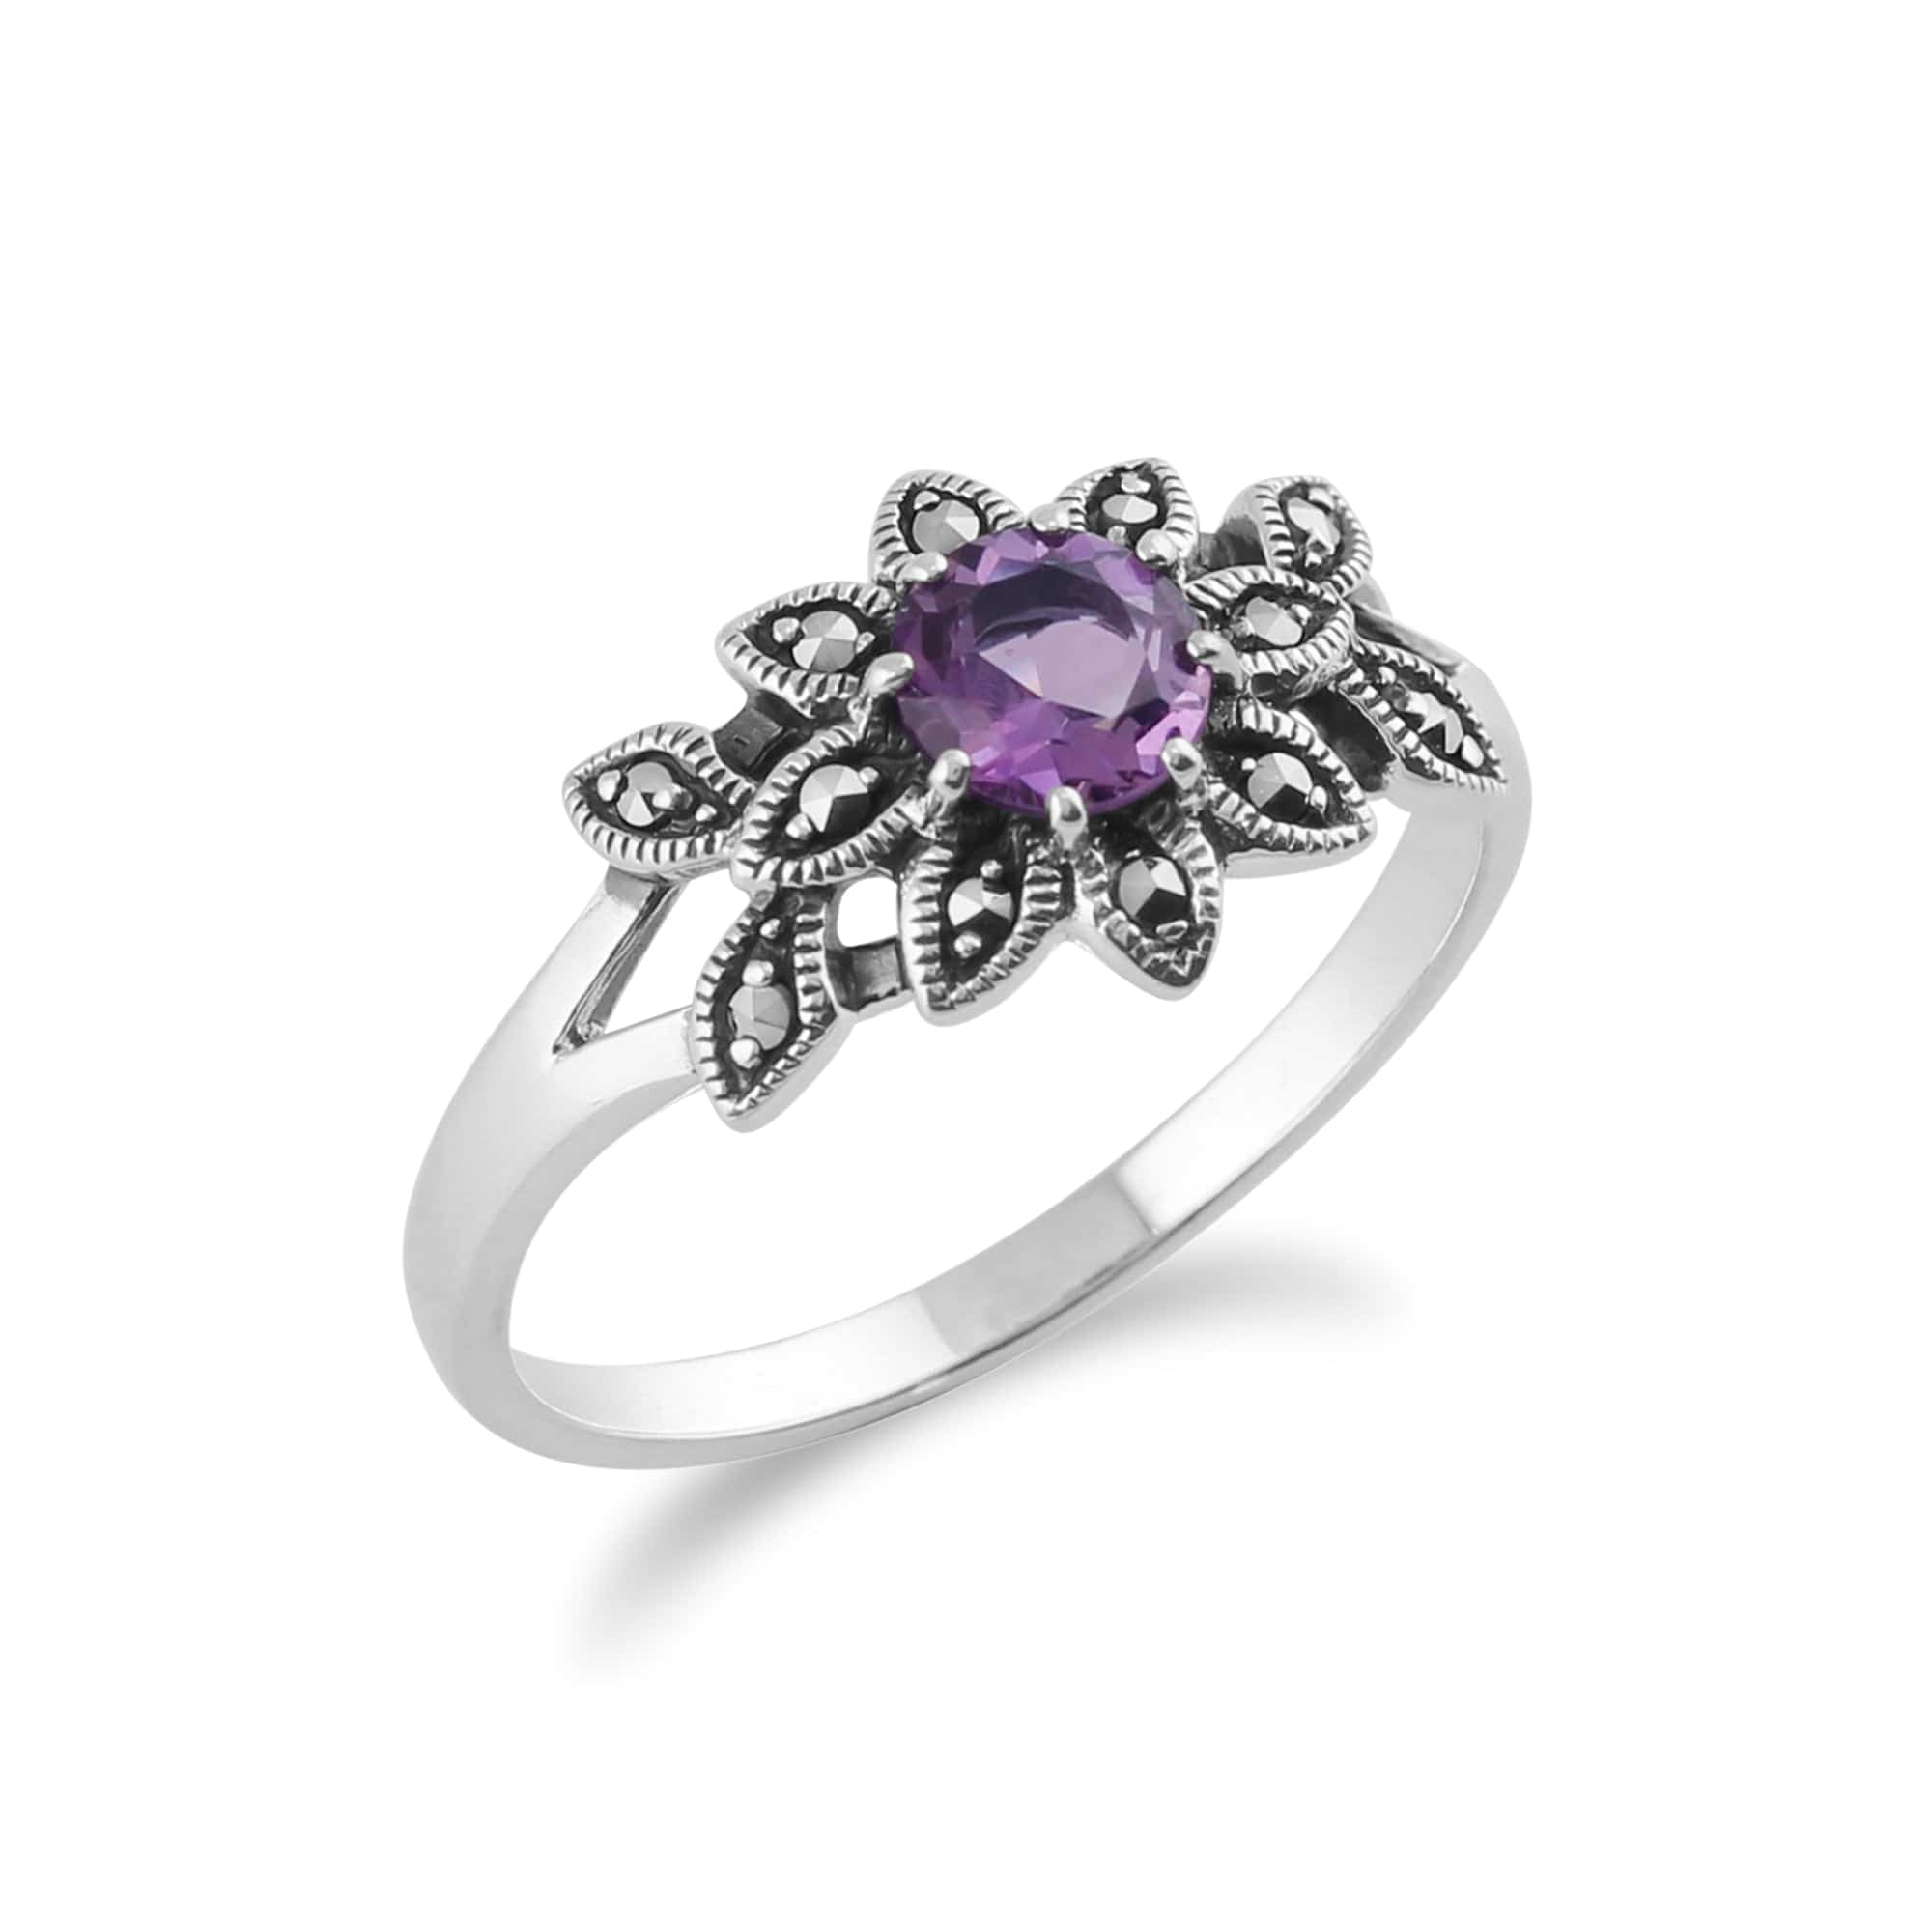 214R467701925 Art Nouveau Style Round Amethyst & Marcasite Floral Ring in 925 Sterling Silver 2